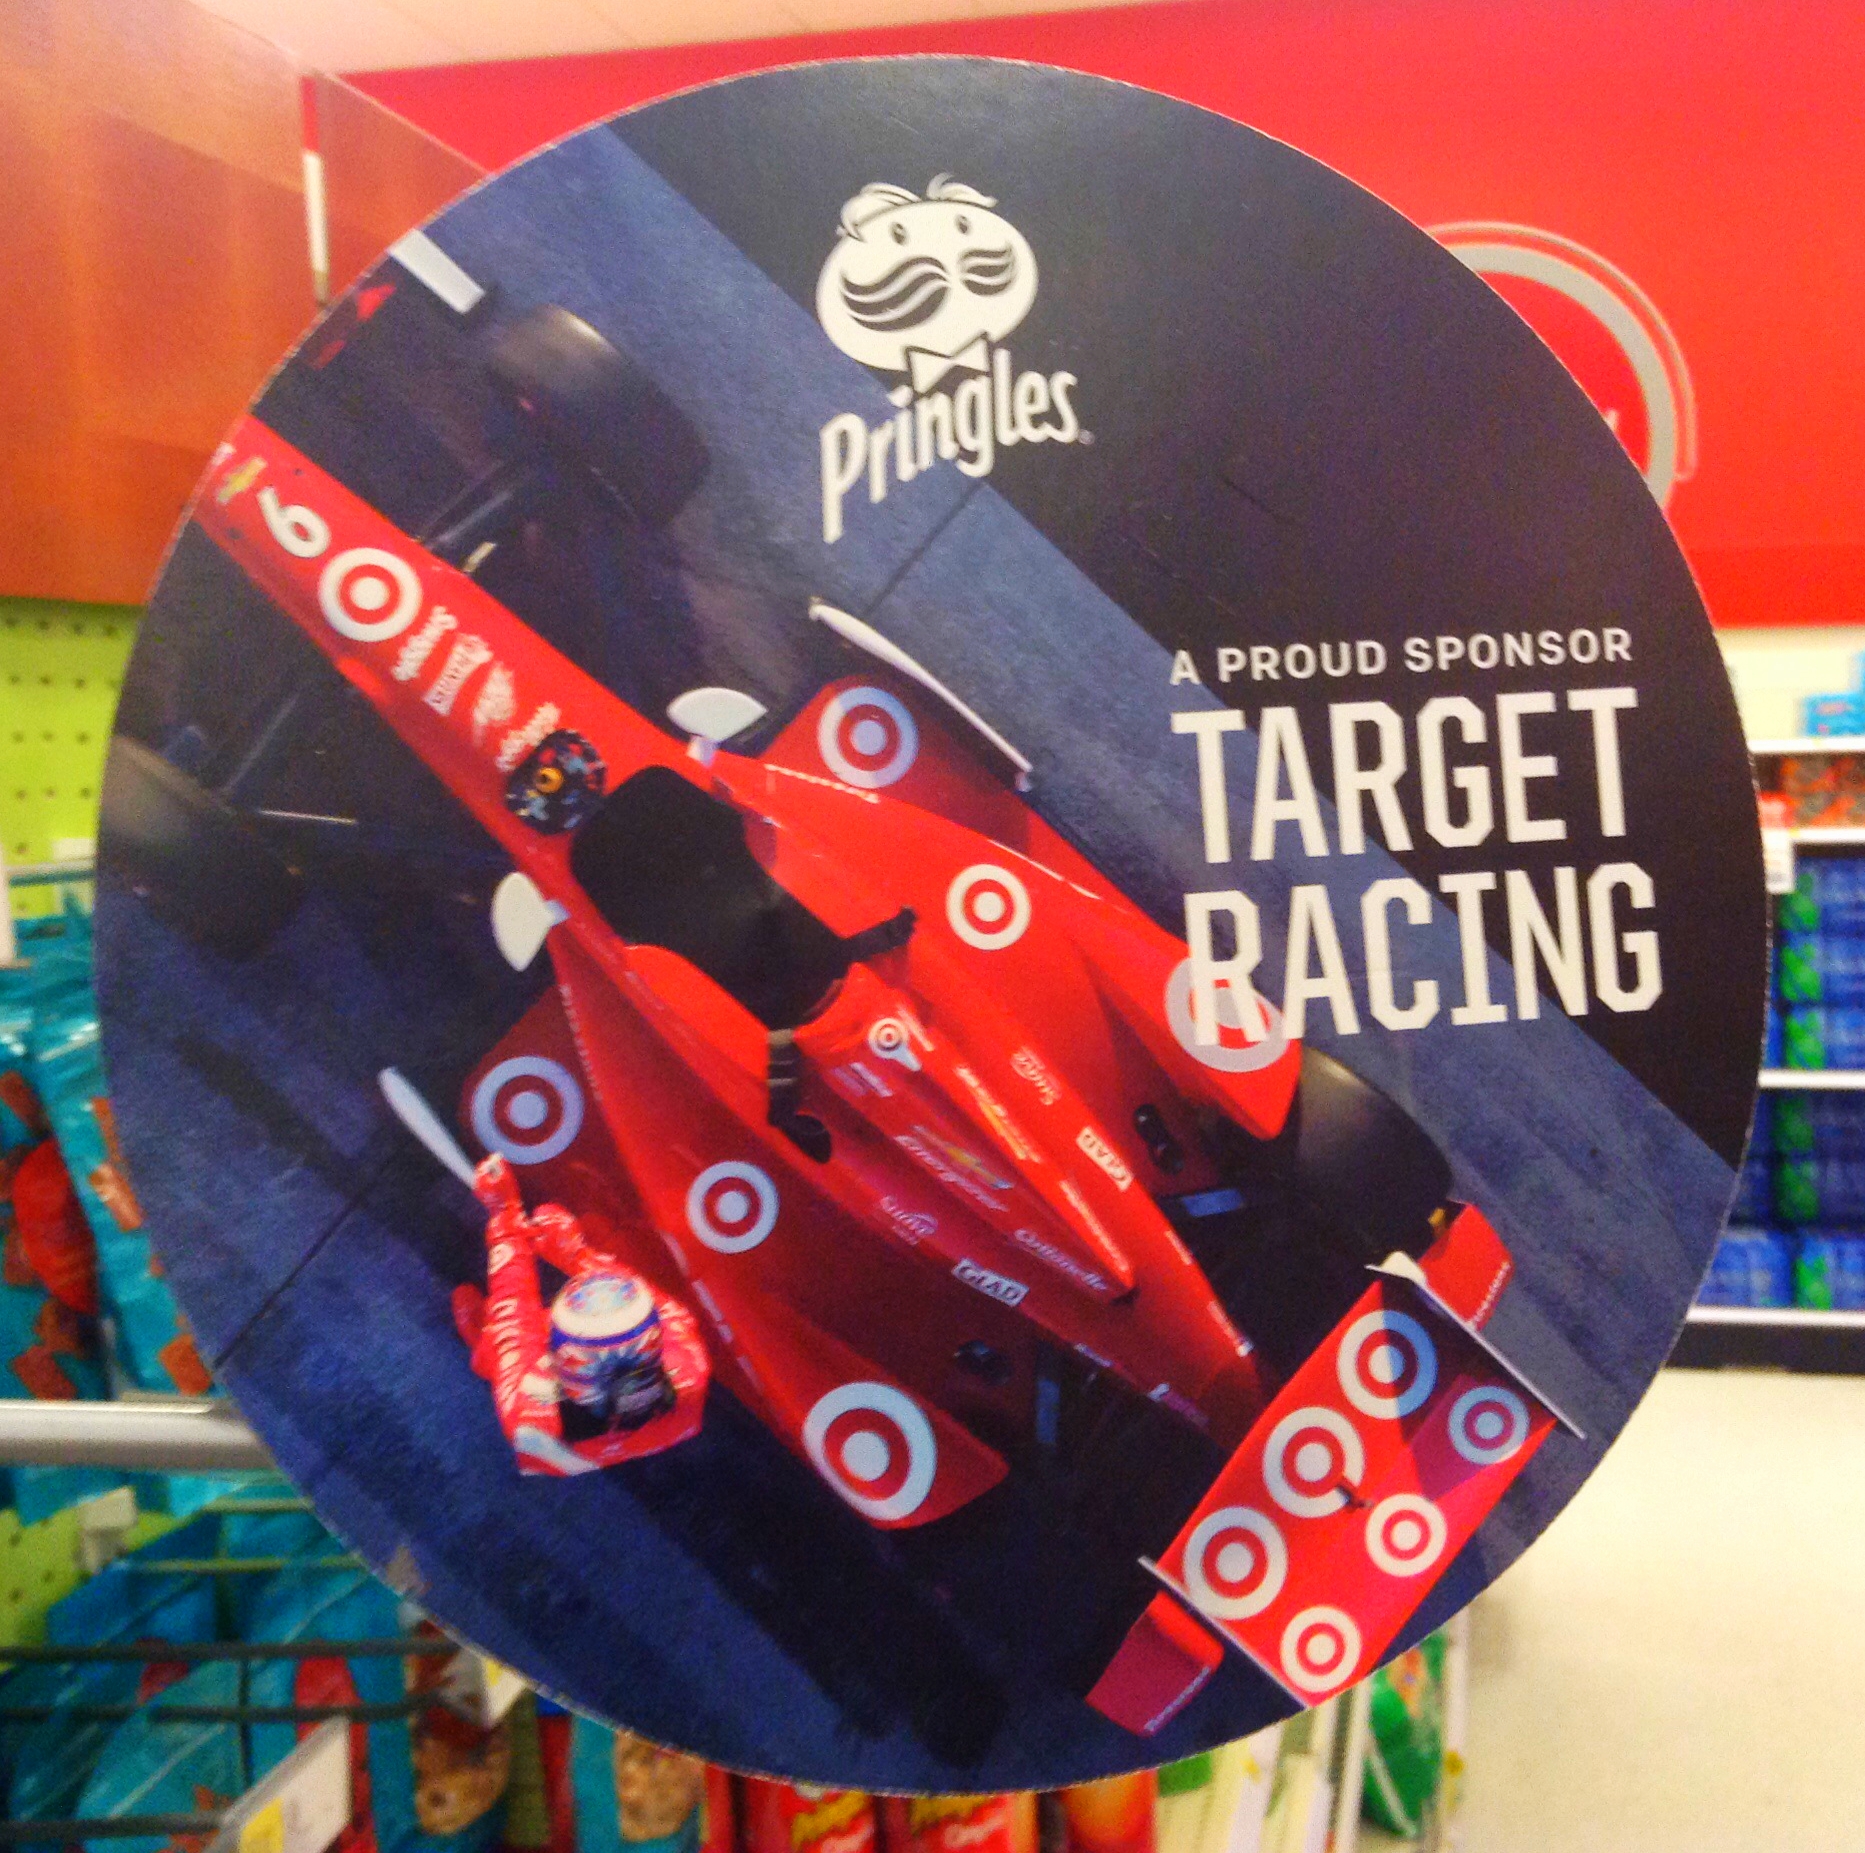 an advertising sign in a store with a race car